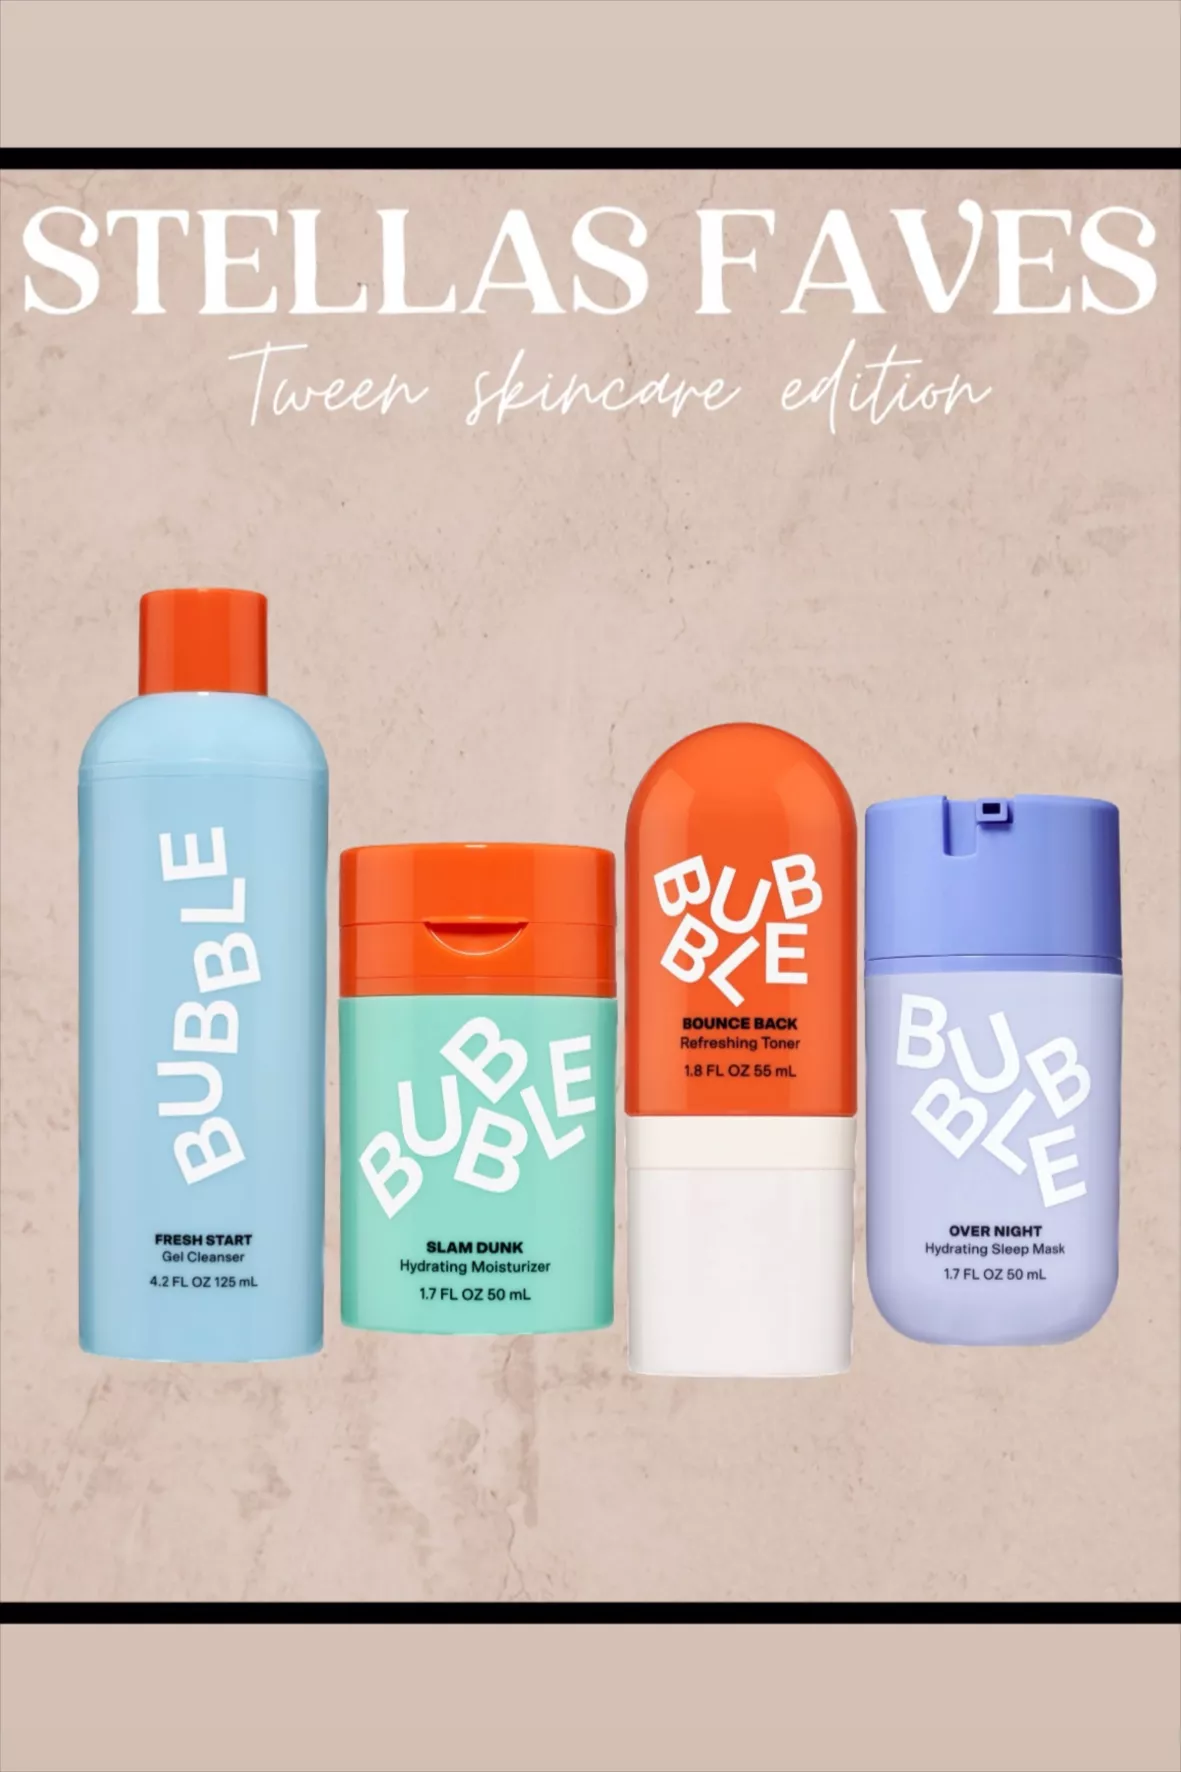 Bubble is the new skincare brand that wants to teach teens all